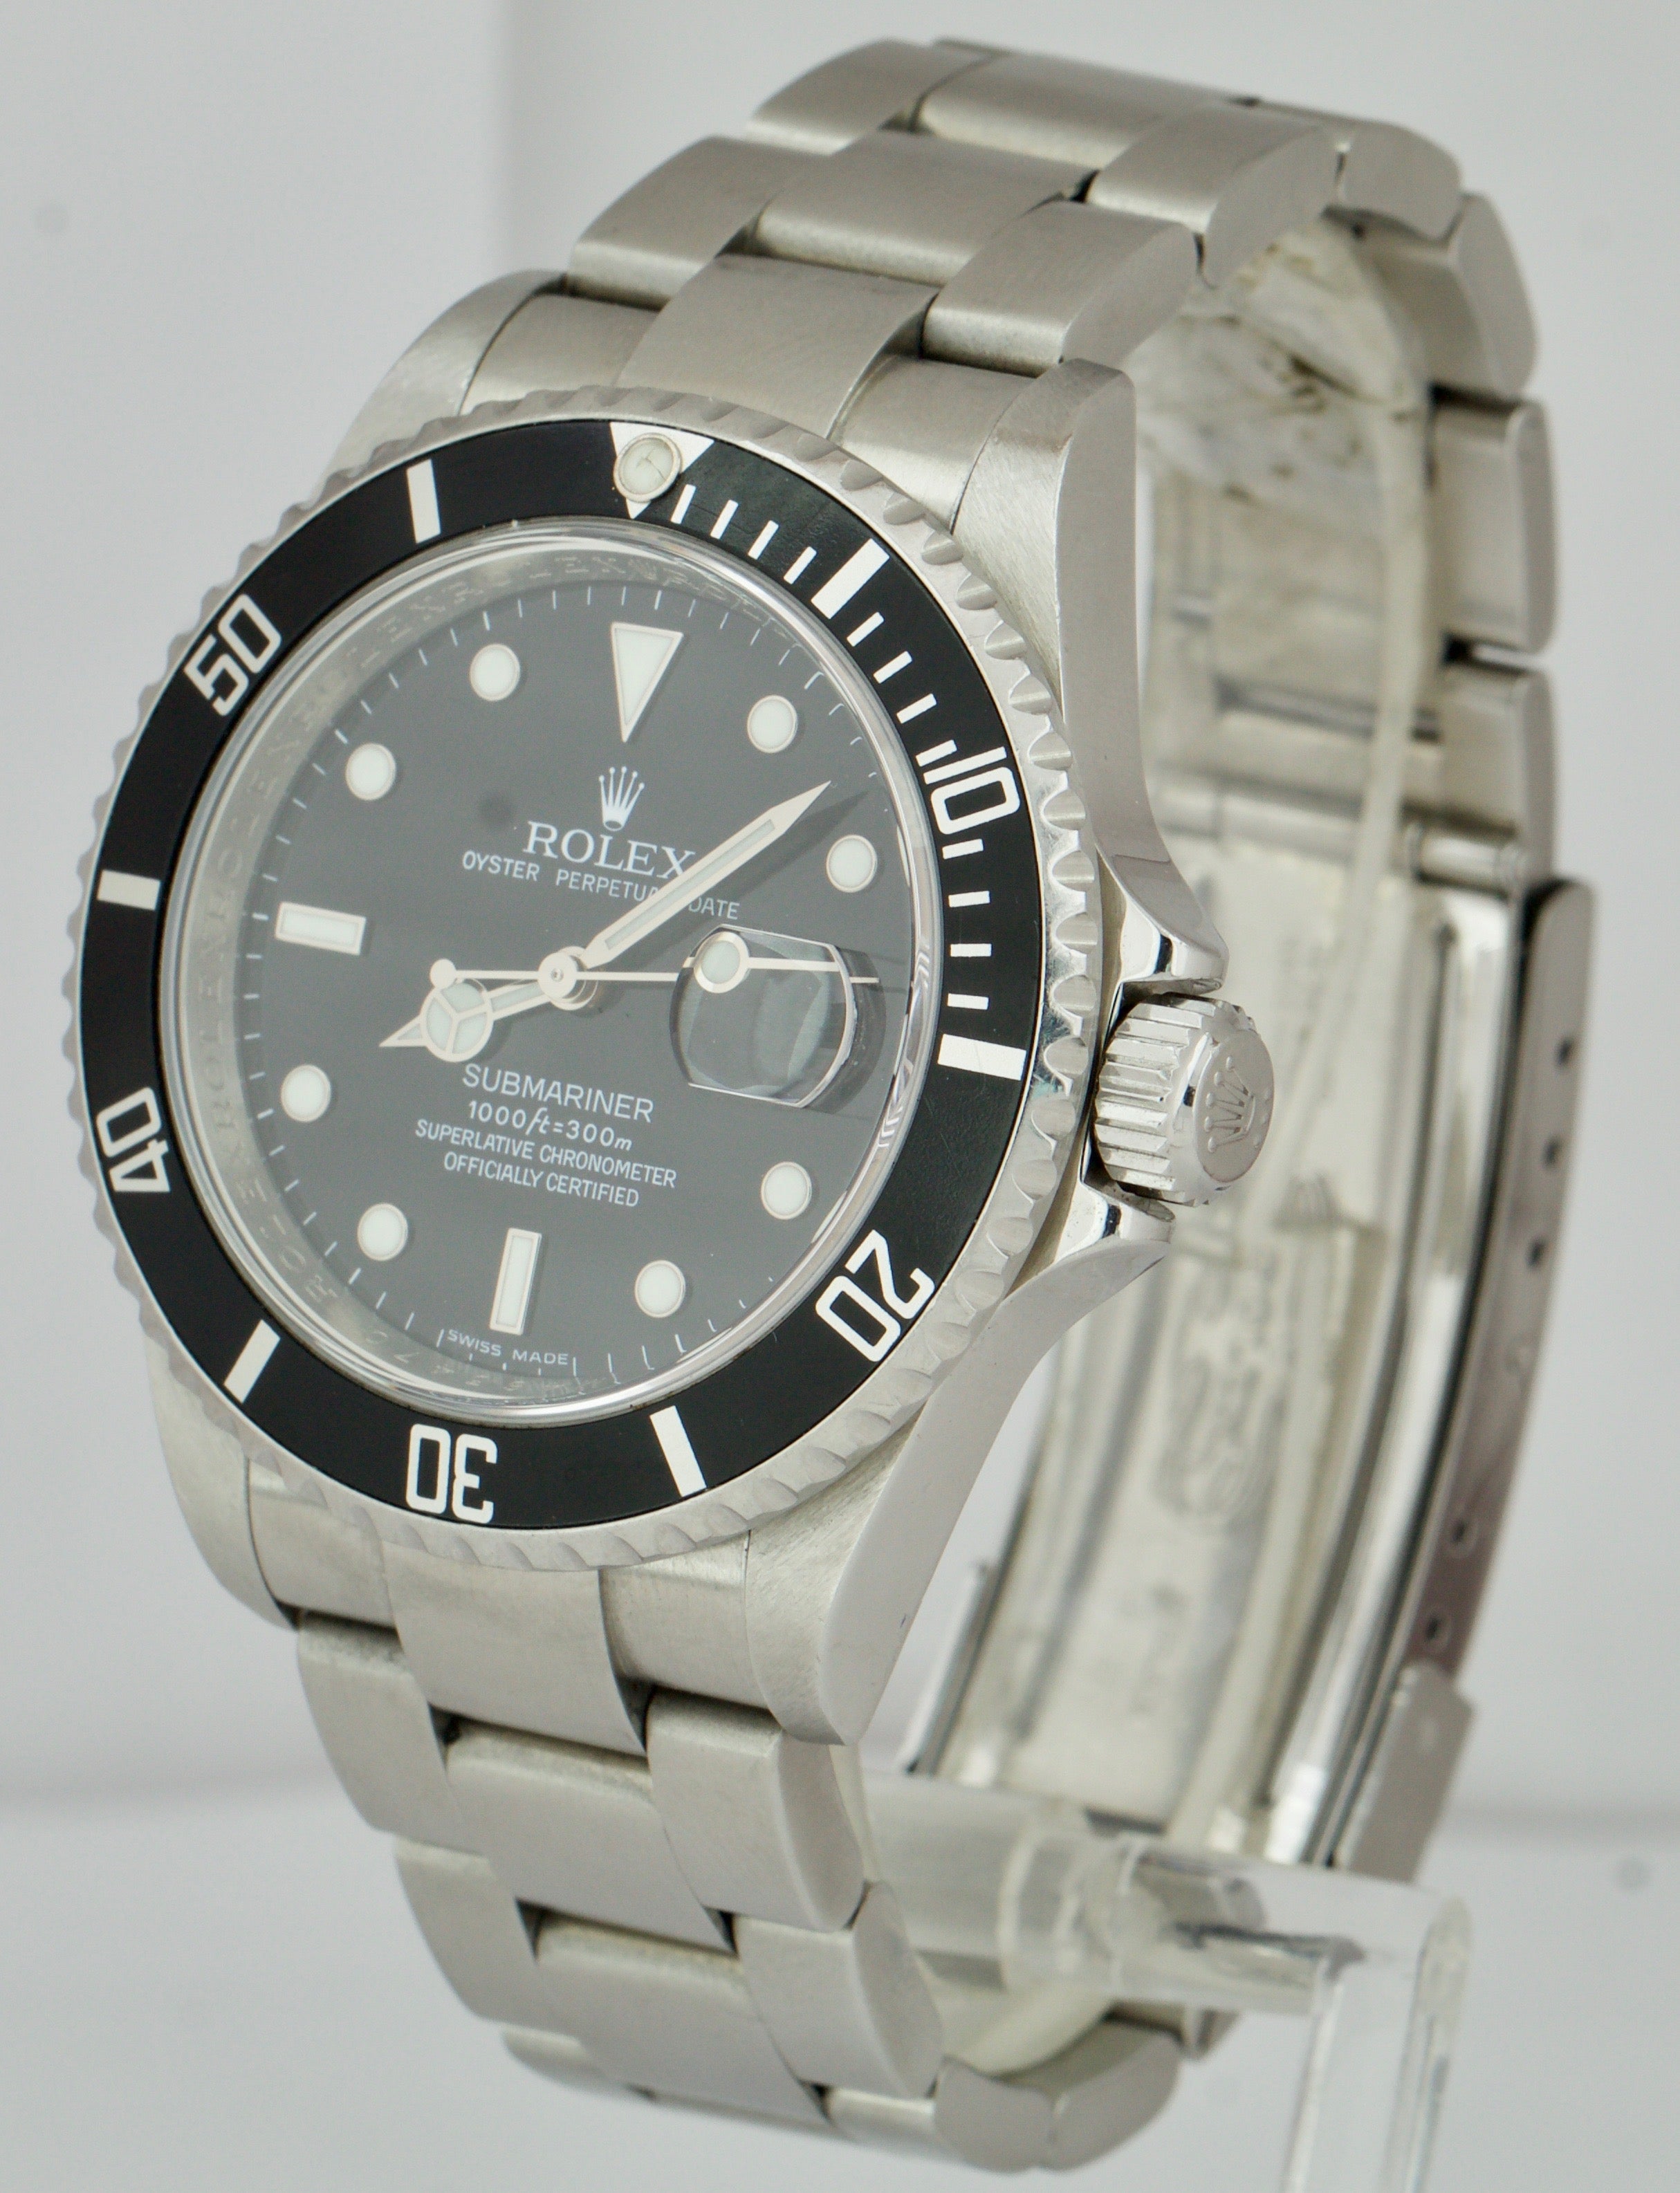 2008 REHAUT Rolex Submariner Date Stainless Pre-Ceramic Watch 16610 BOX PAPERS